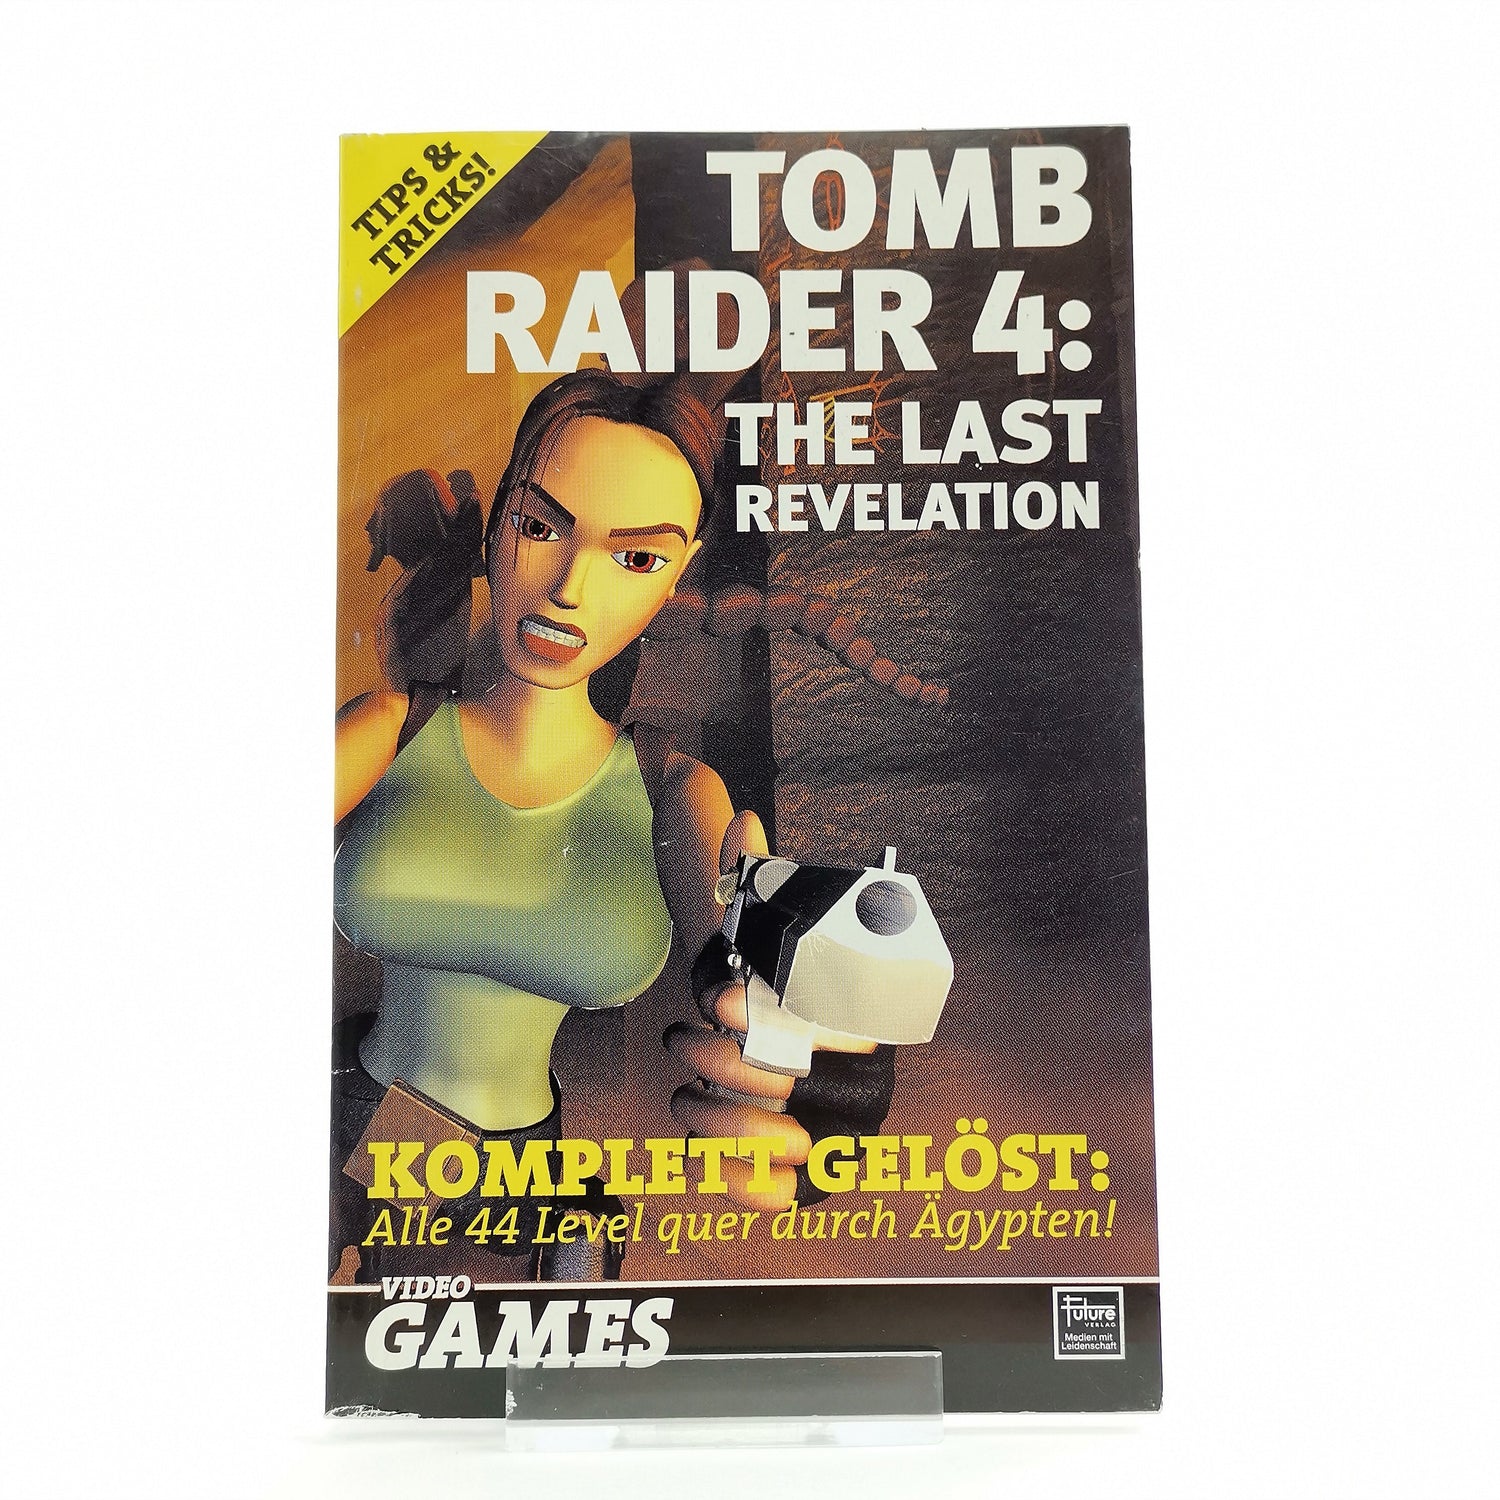 Tips & Tricks Booklet: Tomb Raider 4 The Last Revelation Future Publisher Guide